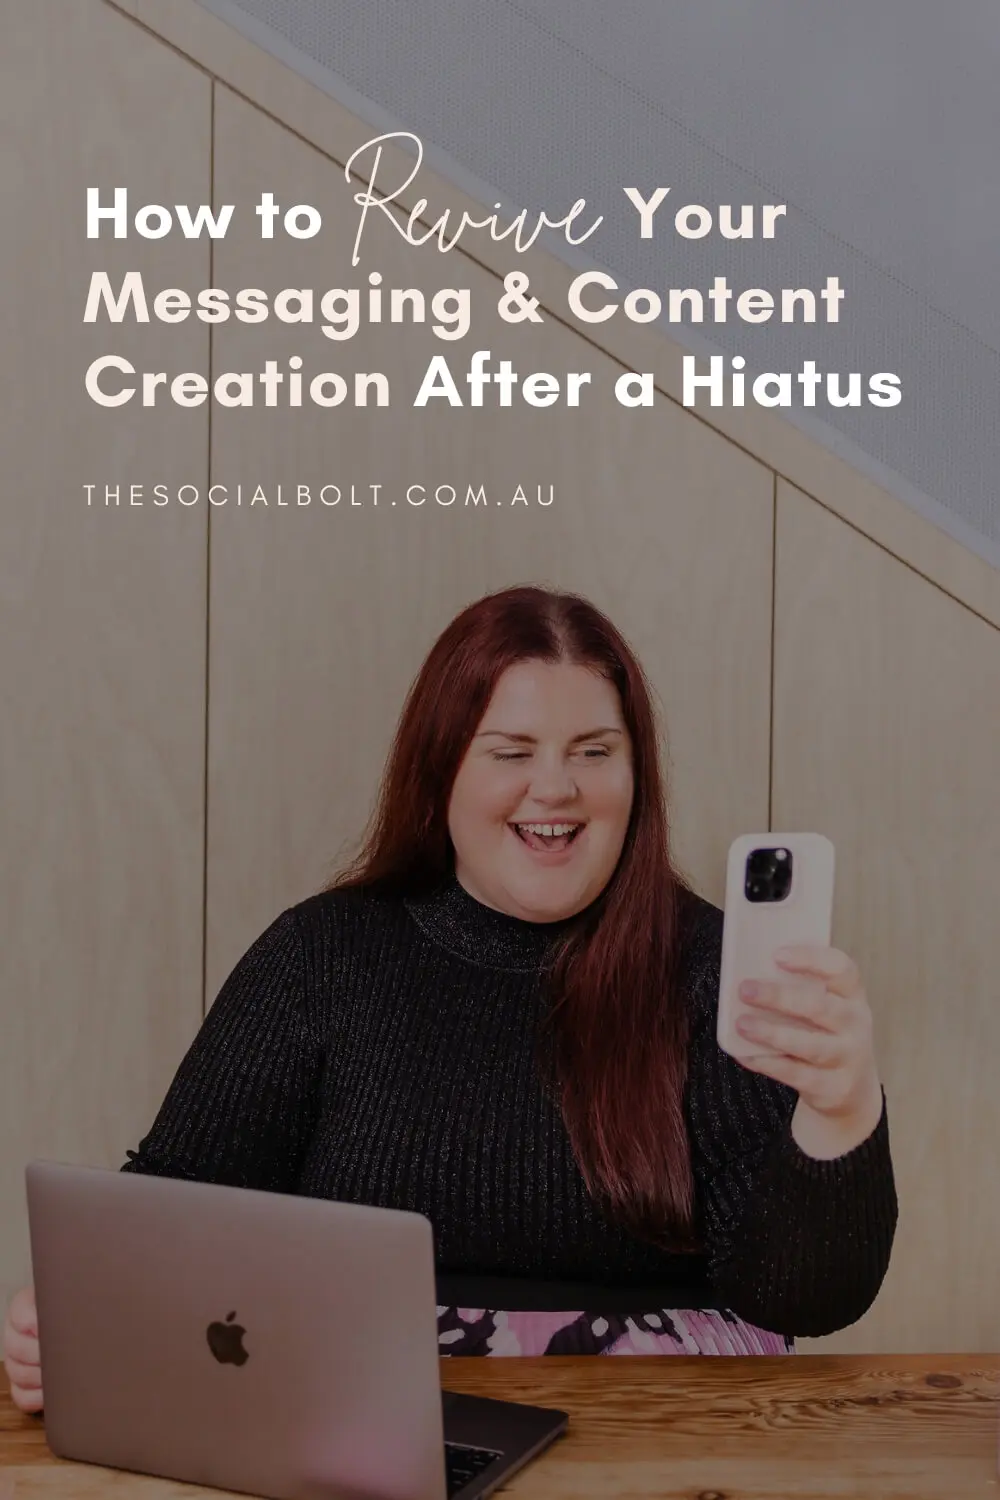 How to Revive Your Messaging & Content Creation After a Hiatus